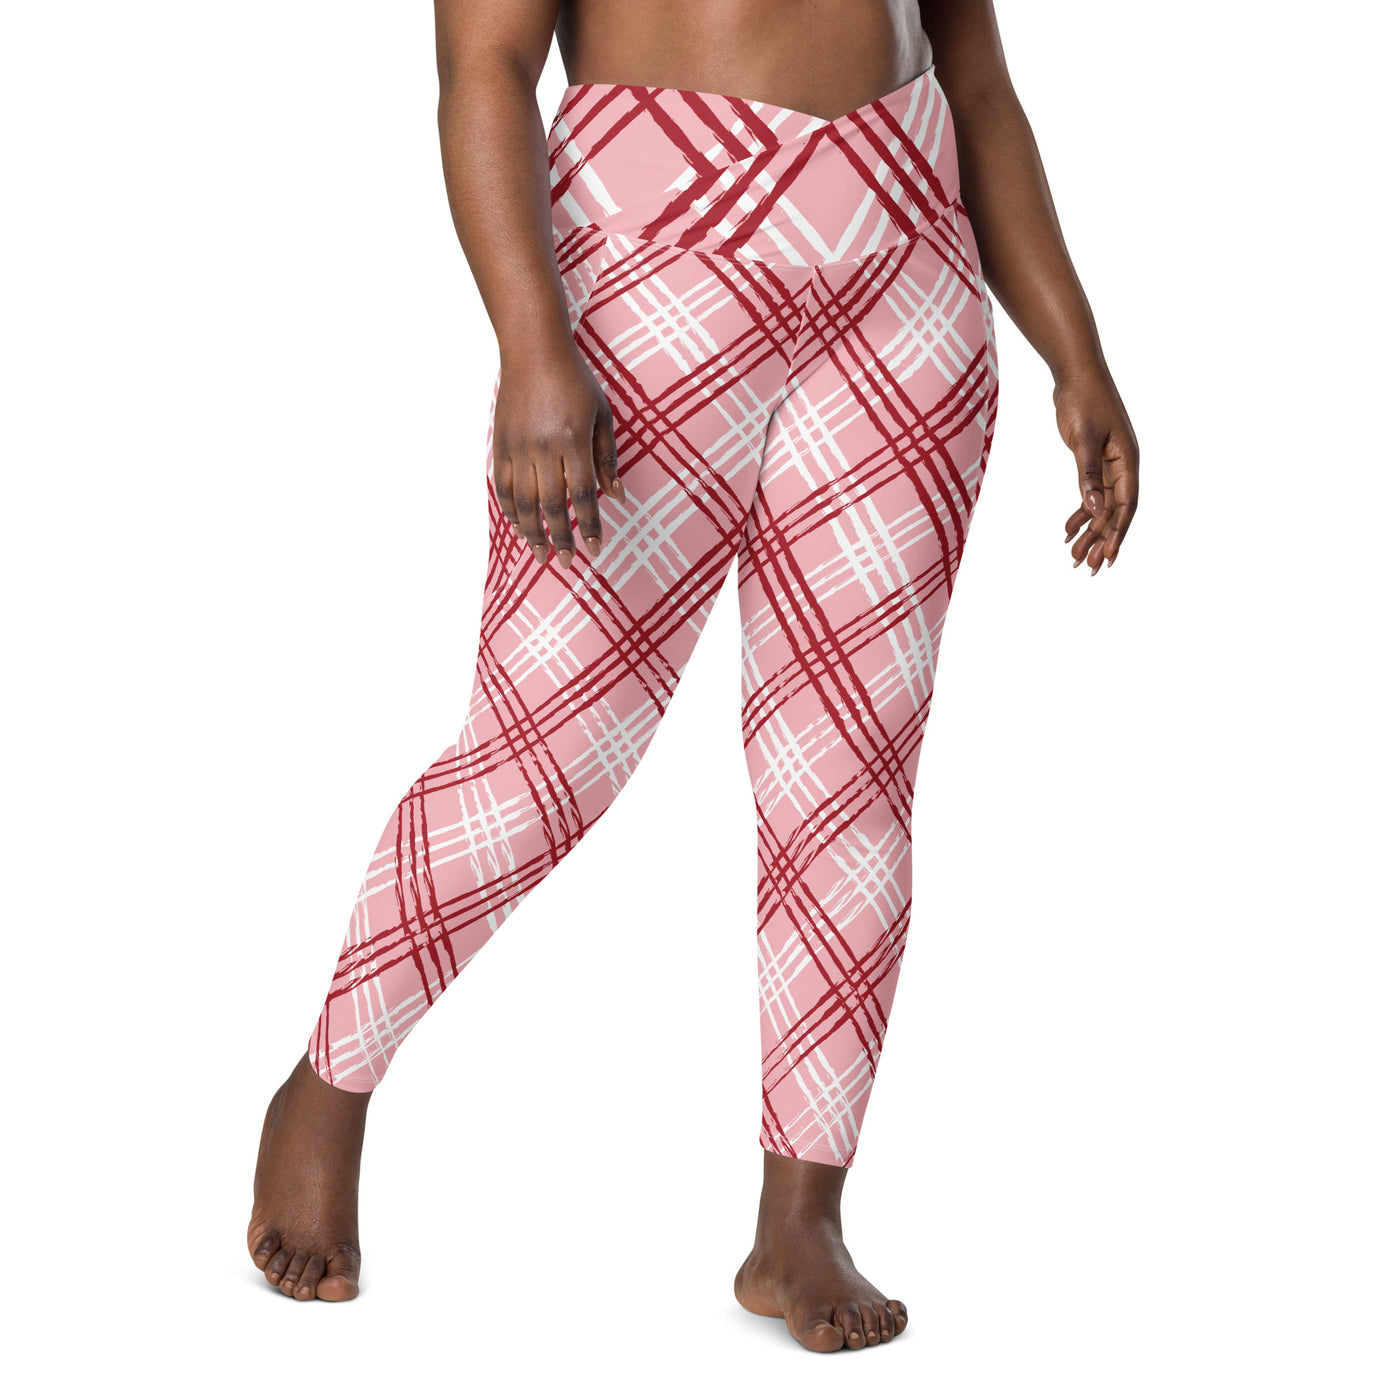 Berry Twist Plaid Plus Size Crossover Leggings with Pockets